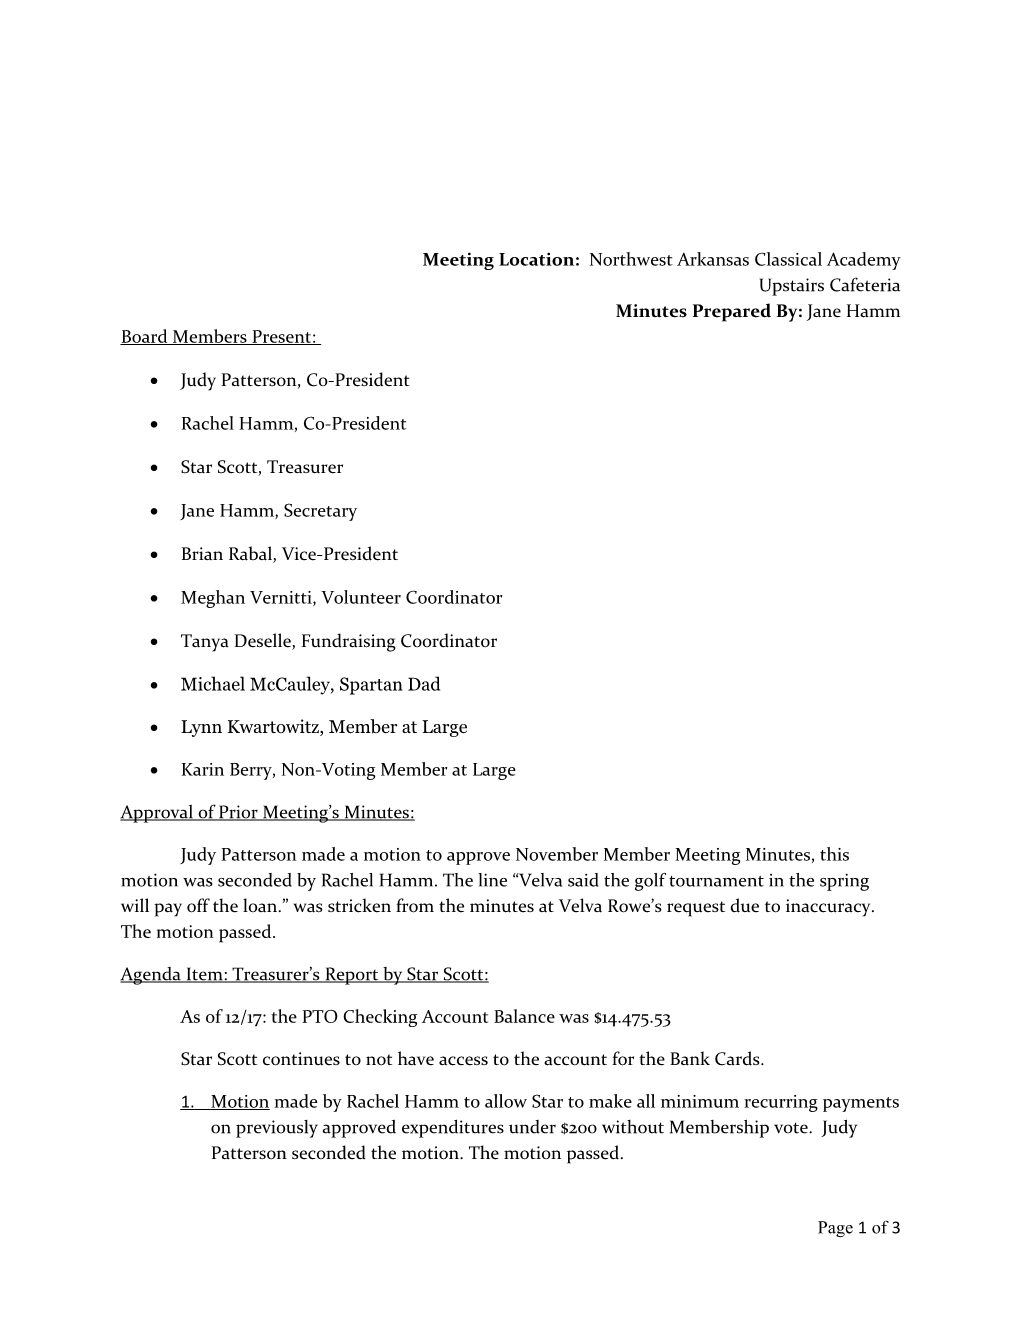 NORTHWEST ARKANSAS Classical Academy Pto Board Meeting Minutes